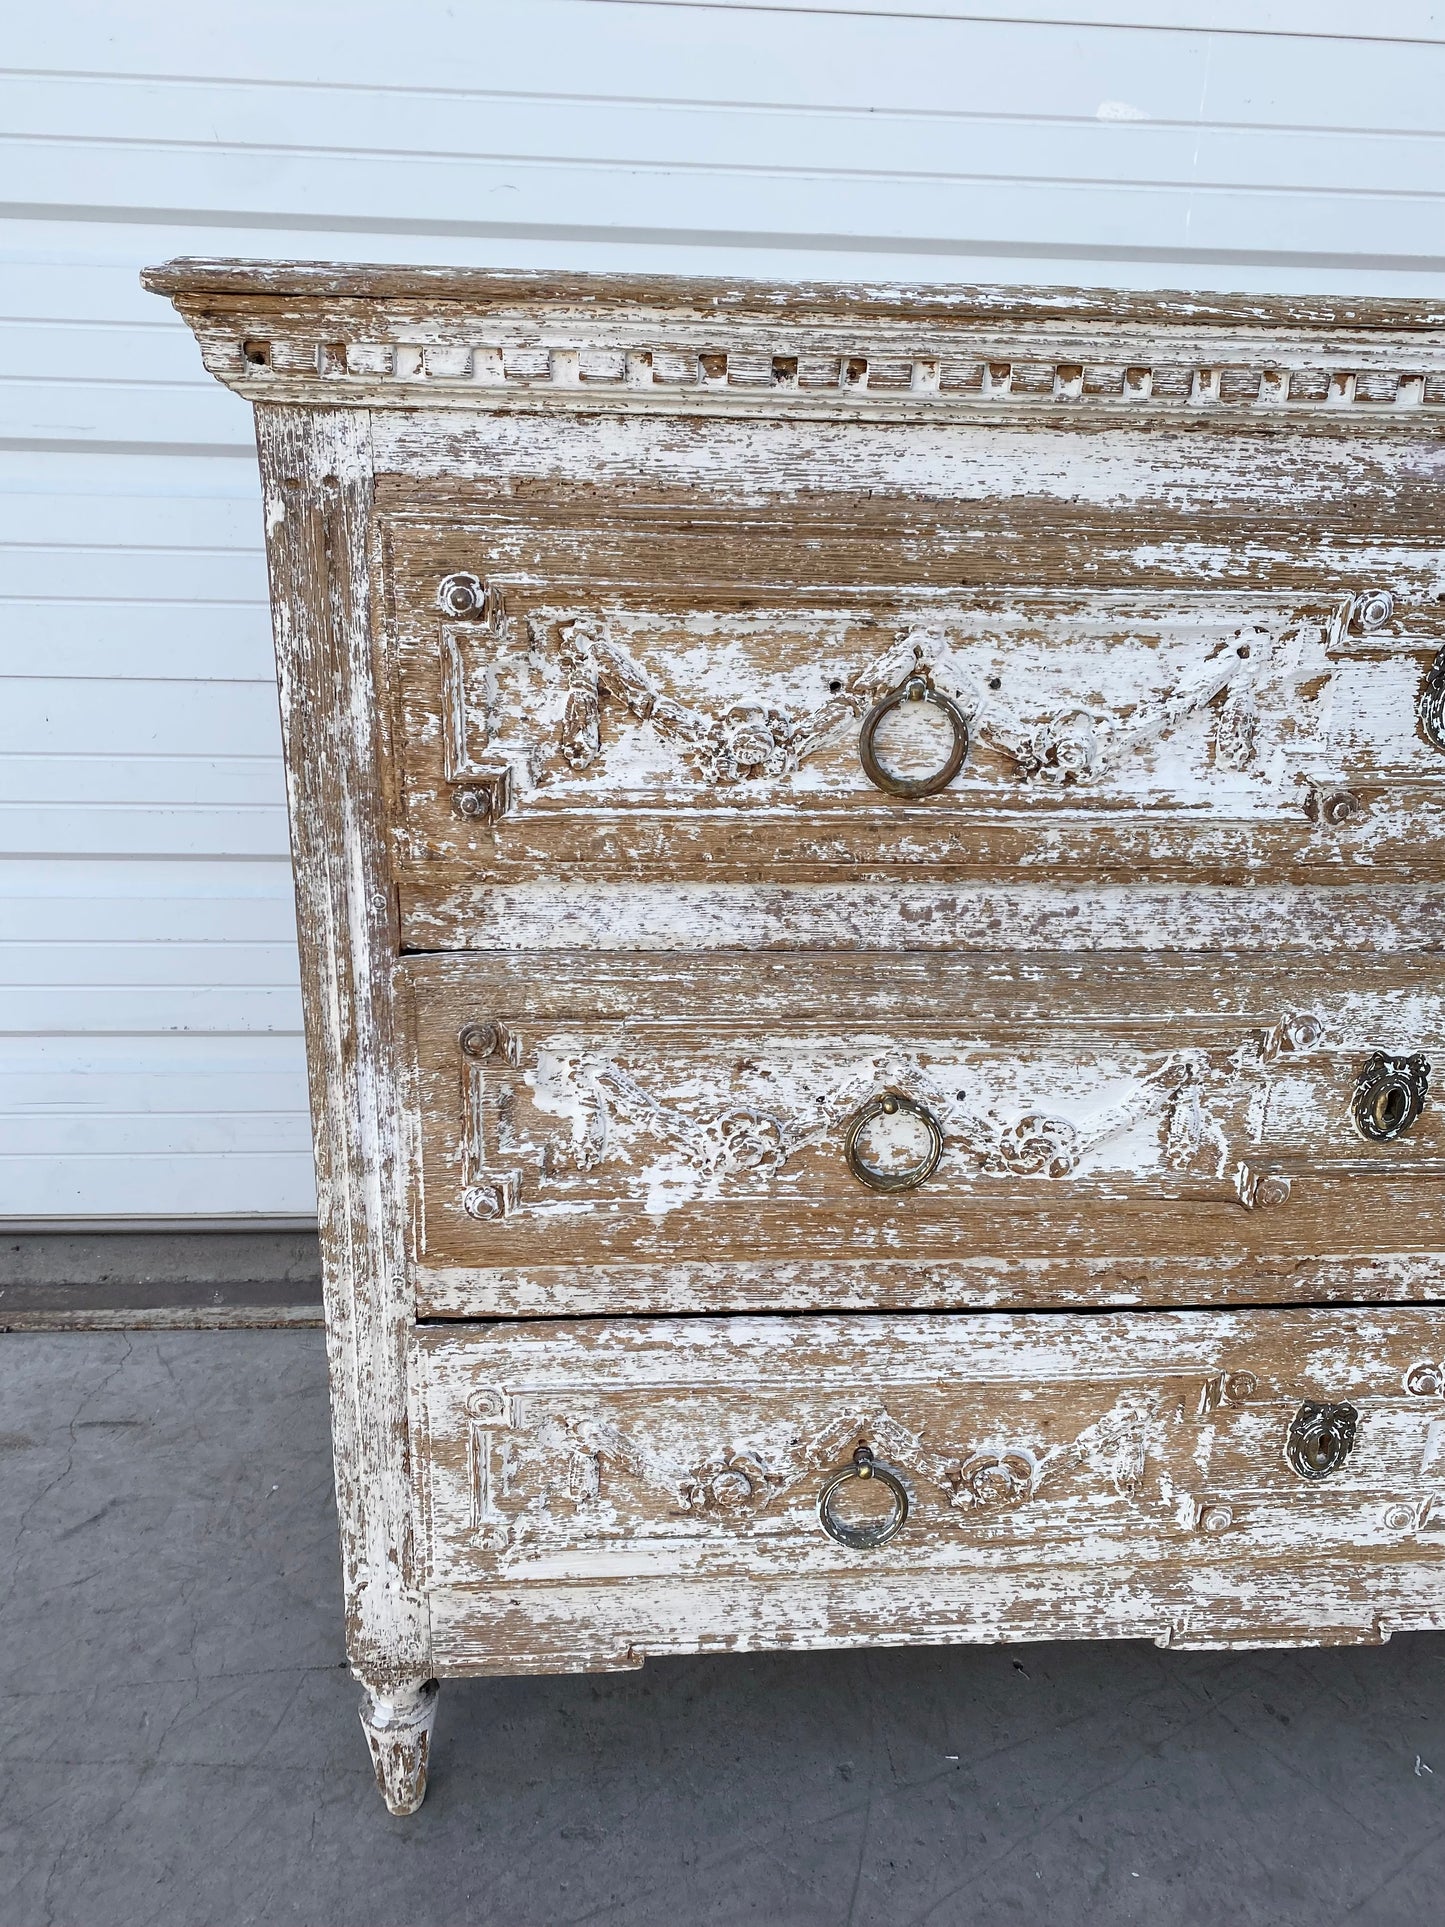 Painted 3 Drawer Antique Commode / Dresser